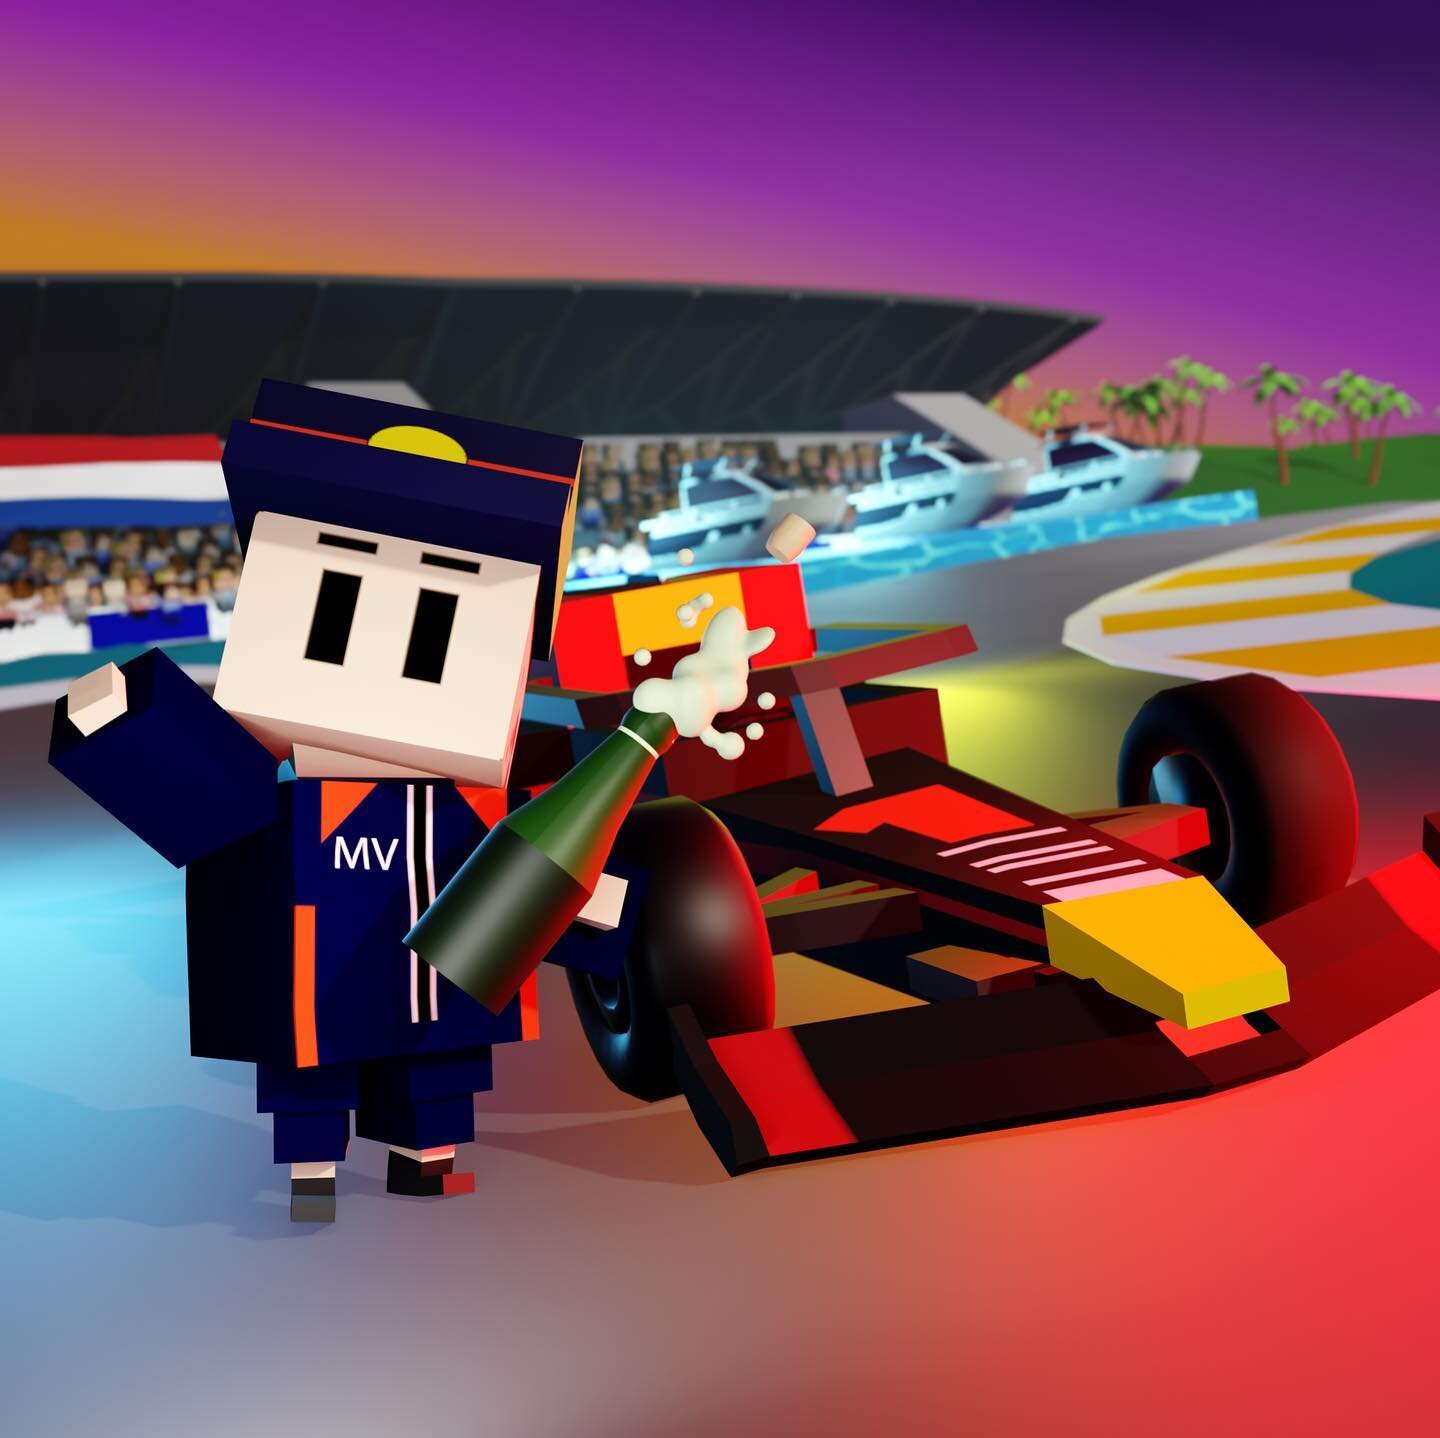 The Formula 1 - Miami Grand Prix 2023 has come to an epic close! 🏎️
&nbsp;
Congratulations to @maxverstappen1 , who secured the win after starting 9th on the grid! 🏆🎉
It was an incredible race that even left Blocky impressed. Leave a comment if yo